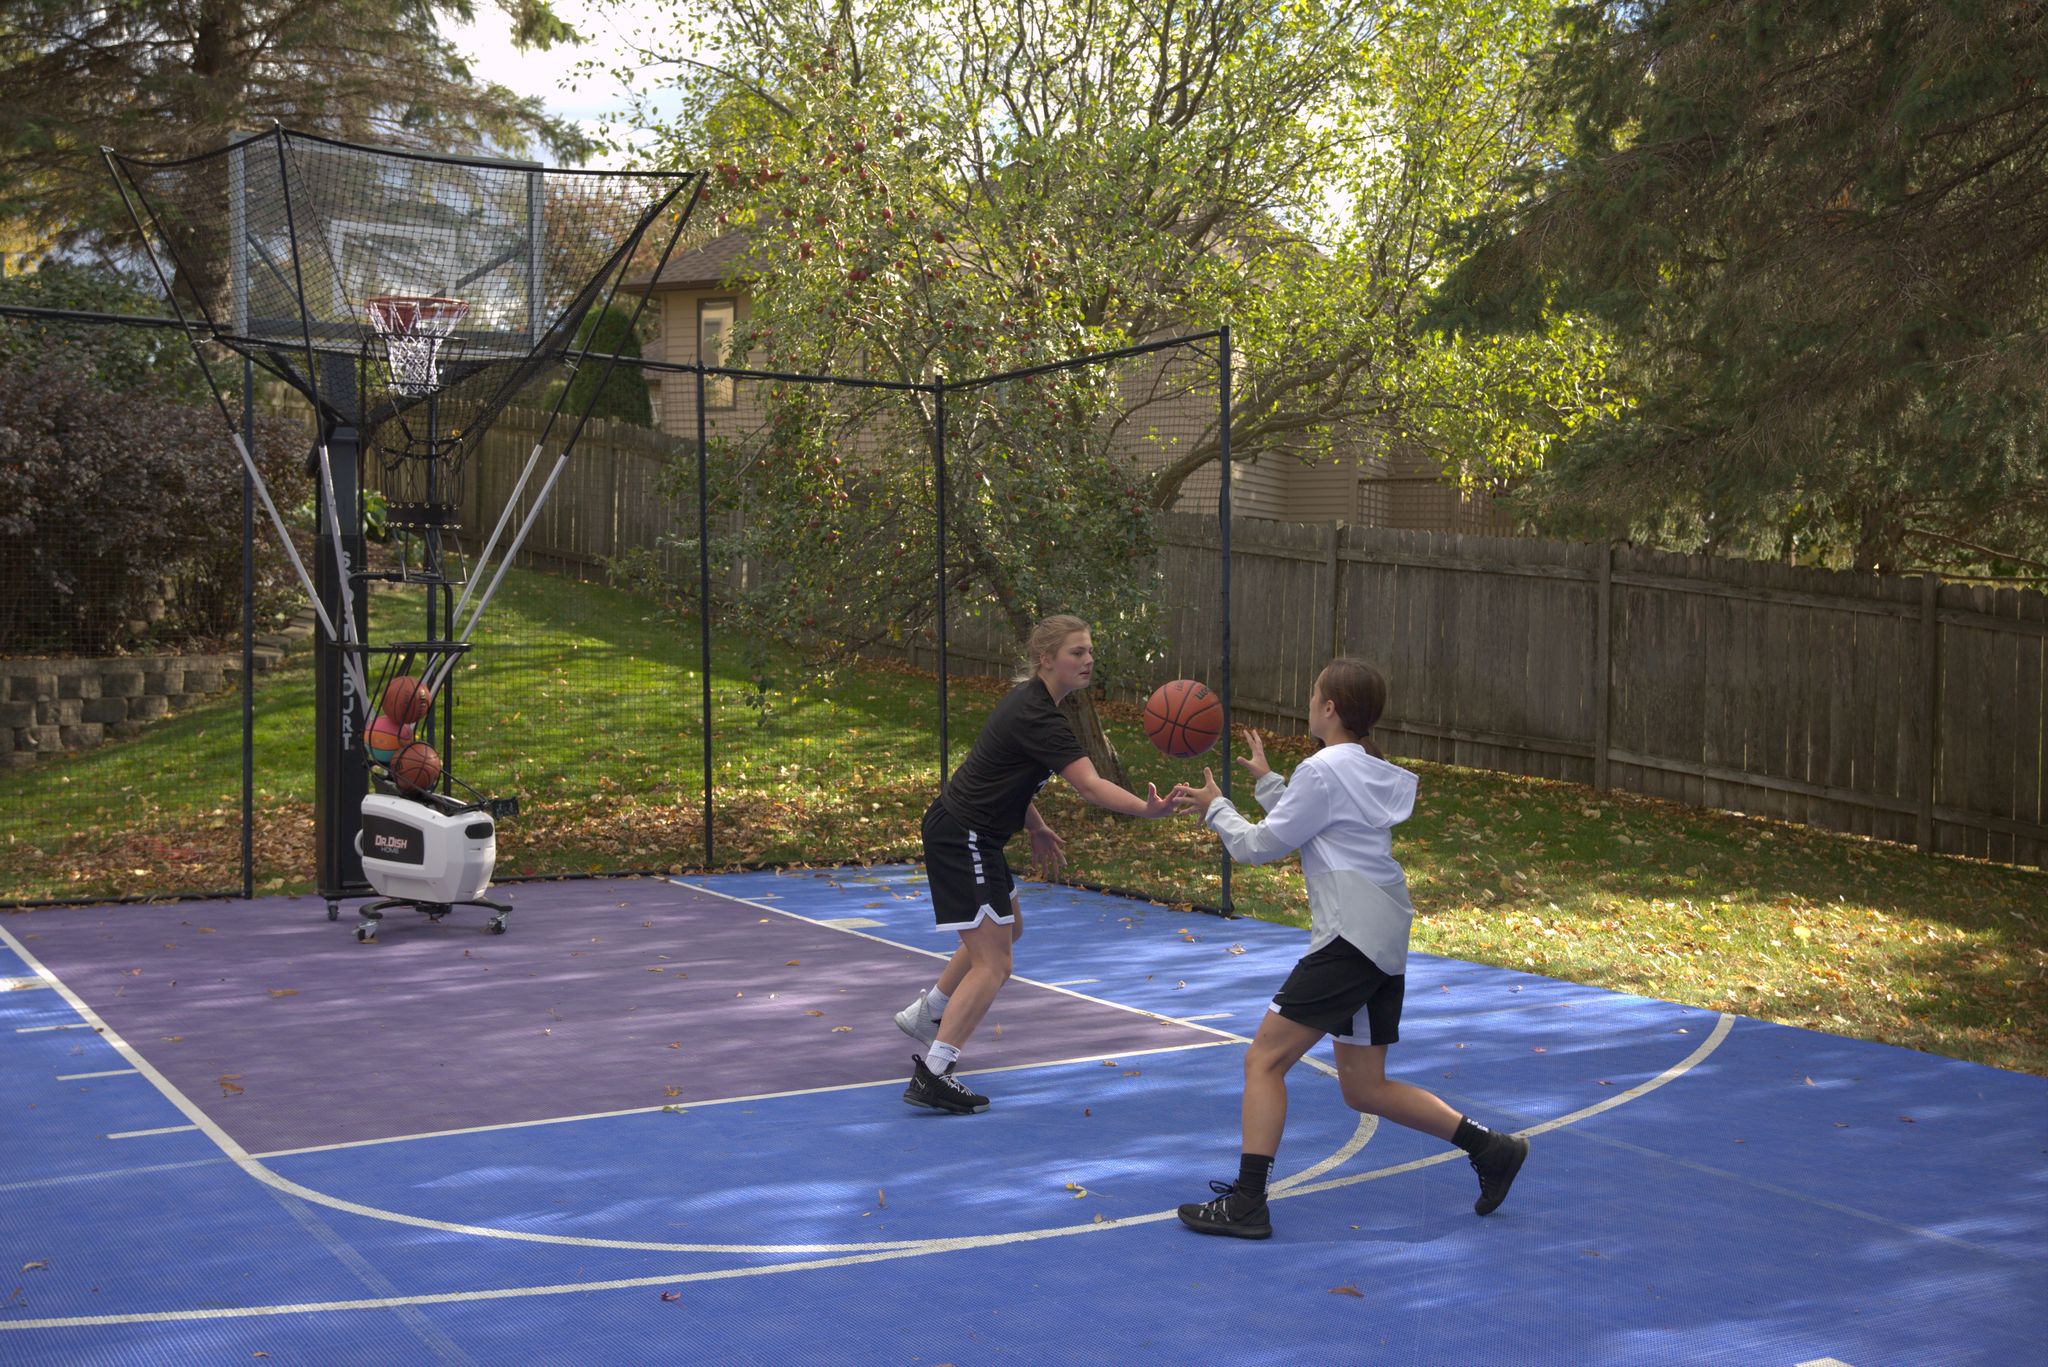 5 Keys to Improving your Shot this Off-Season